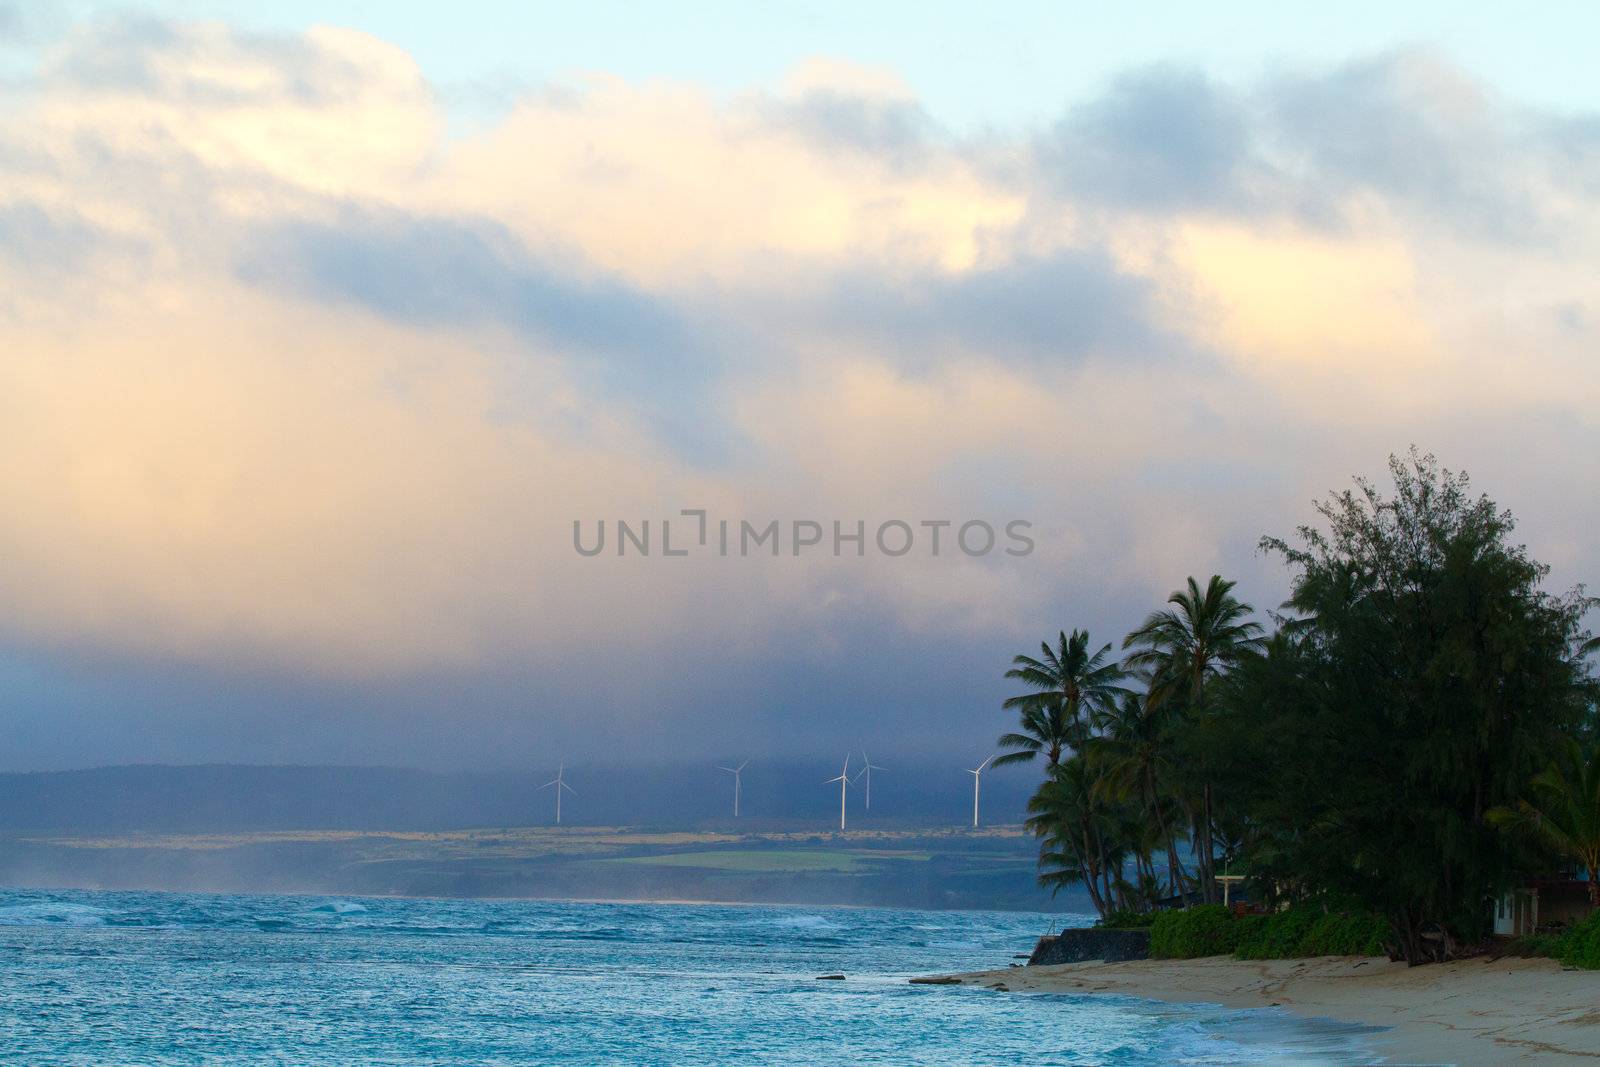 The tropical island of Oahu Hawaii hosts this huge wind farm just beyond the waves of the north shore. These wind turbines produce power for the island in a green environmentally friendly way.